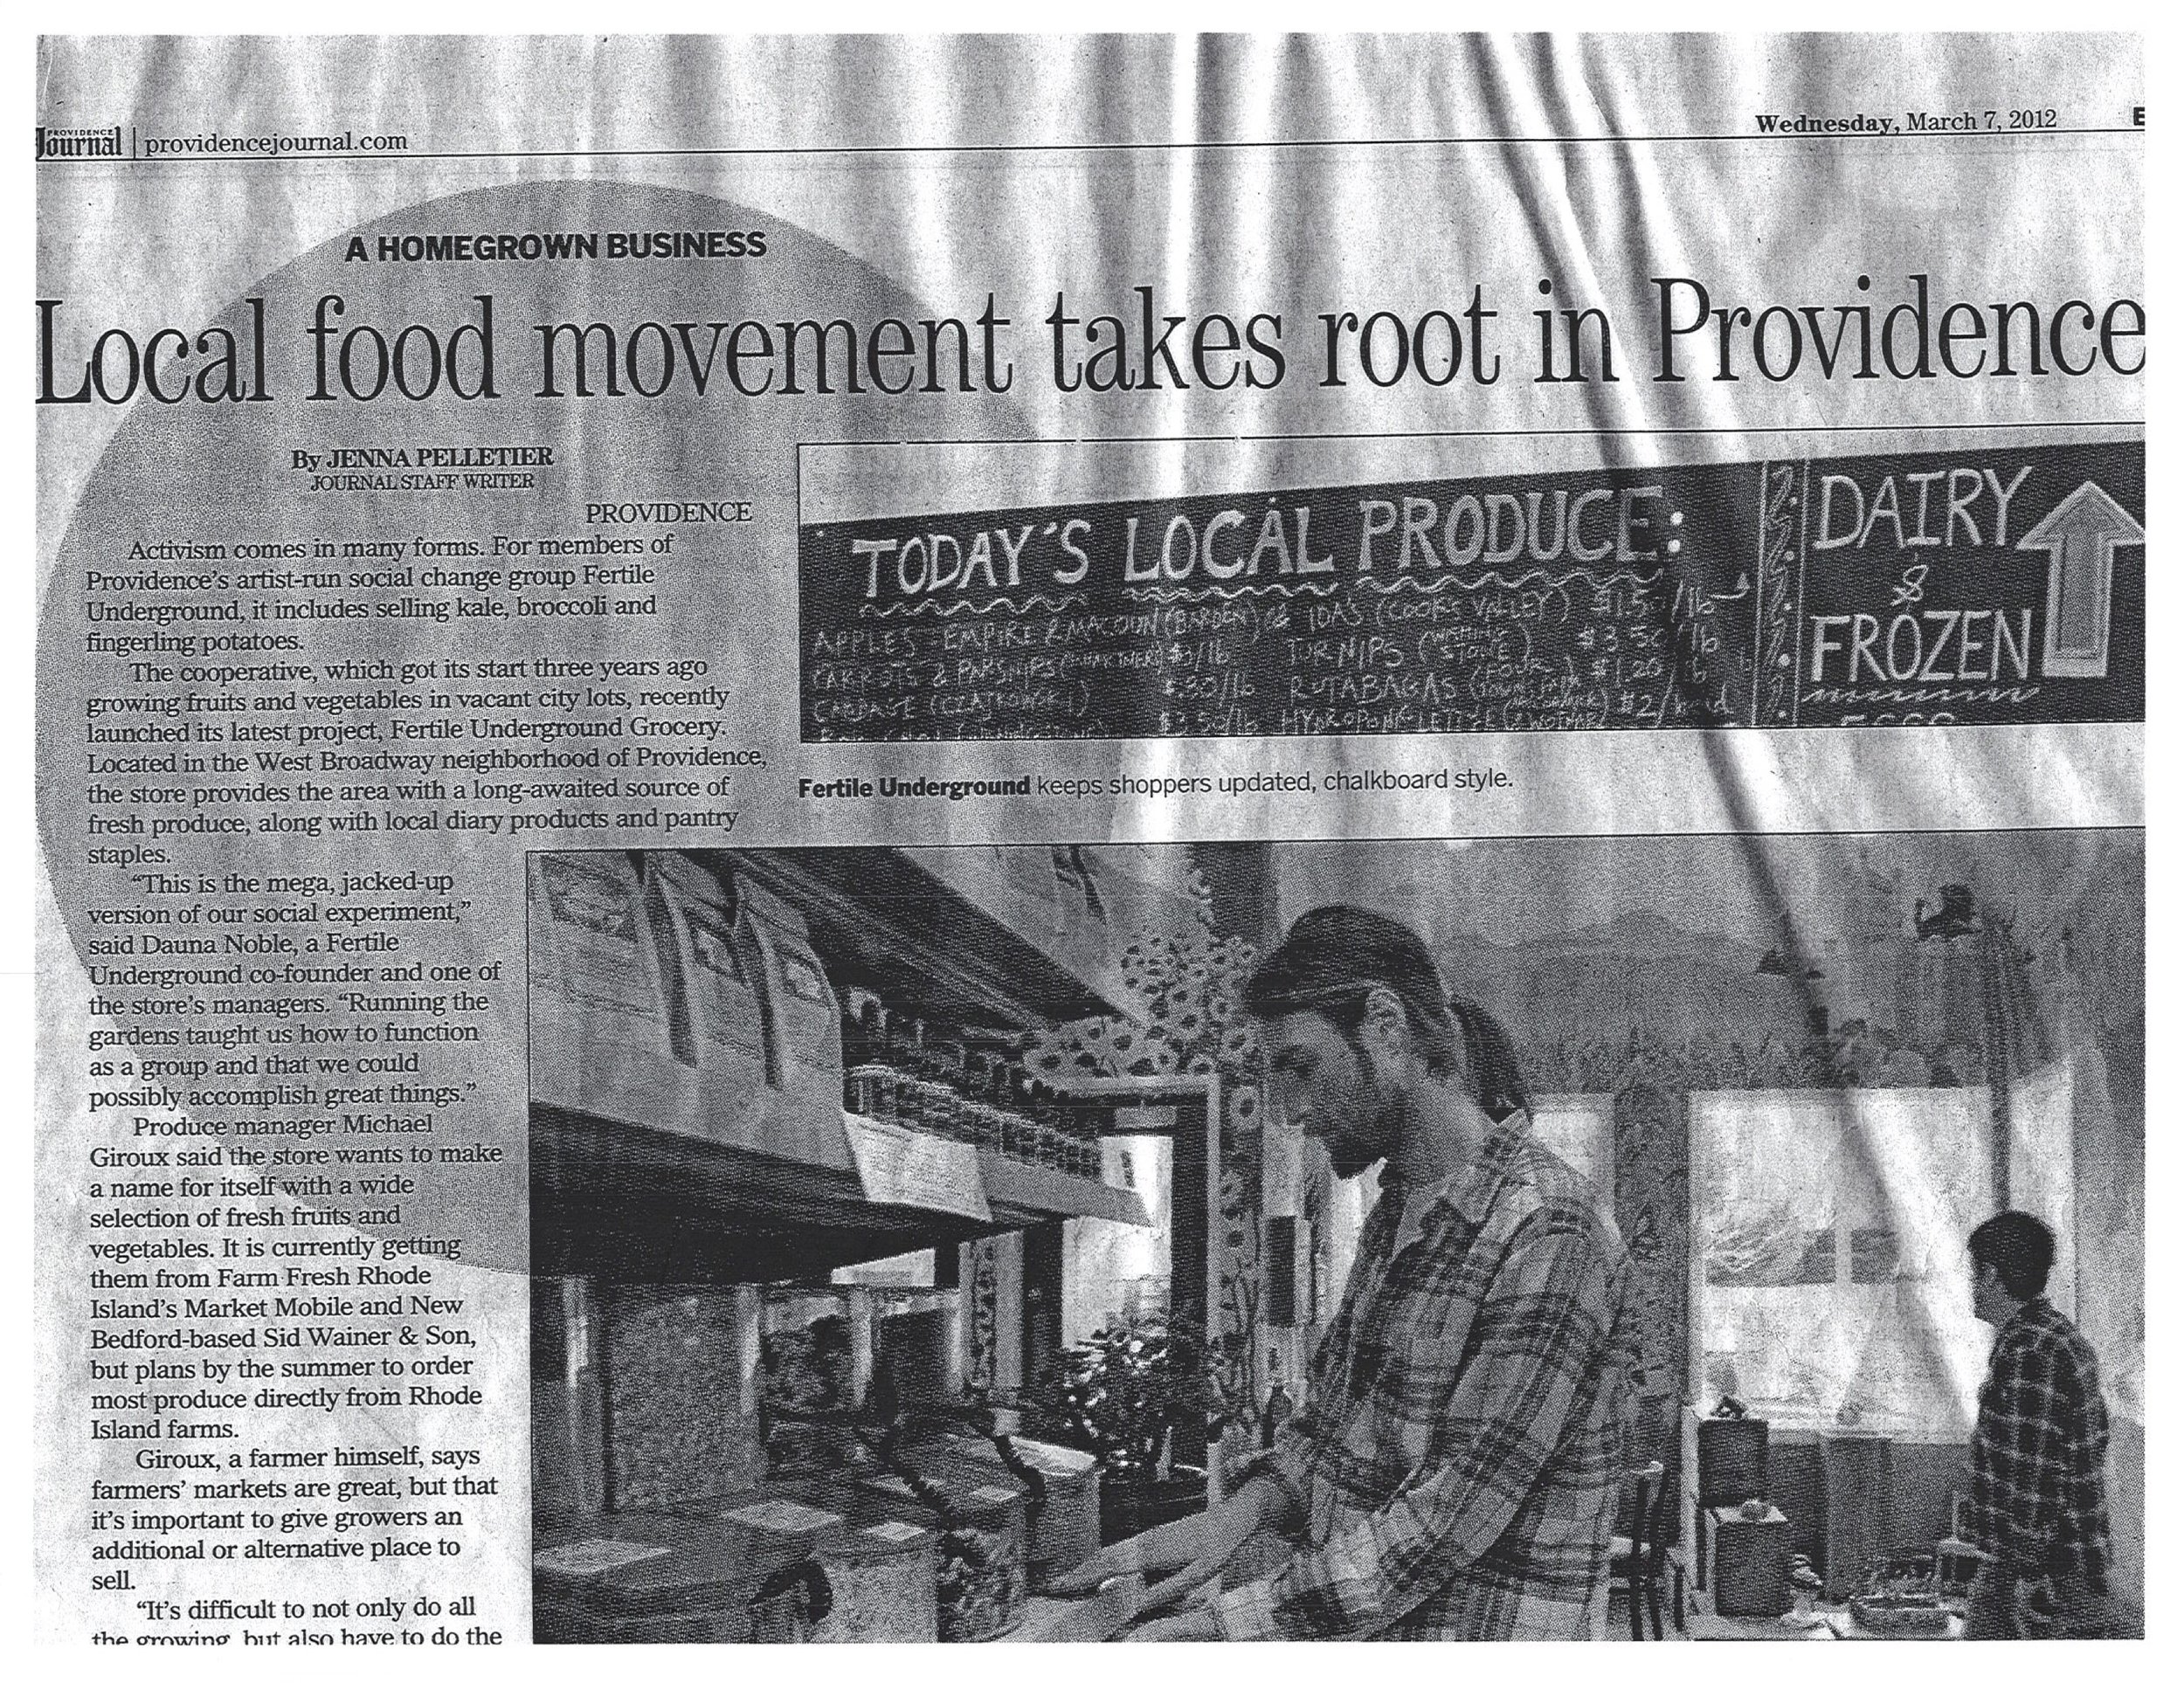  Providence Journal article, March 7, 2012 